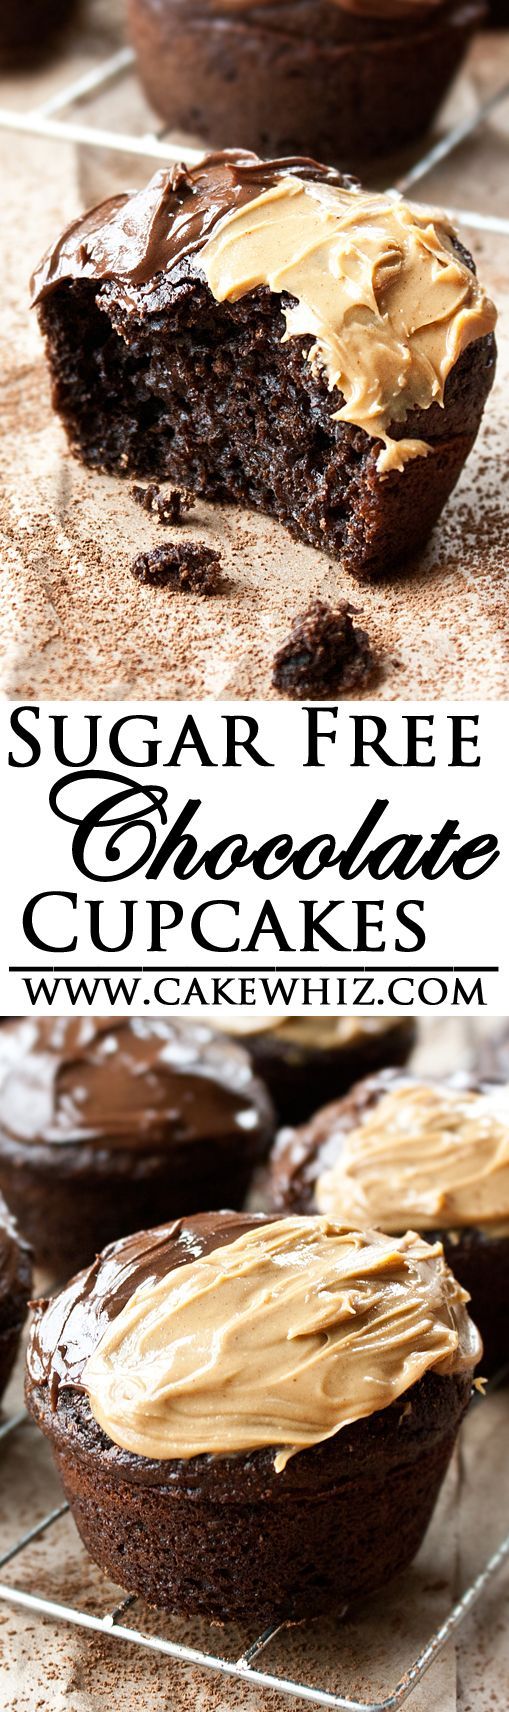 These delicious SUGAR FREE CHOCOLATE CUPCAKES are made with no sugar but are still incredibly soft! Made from scratch, this easy recipe is perfect for diabetics! From cakewhiz.com -   23 no sugar cupcakes
 ideas